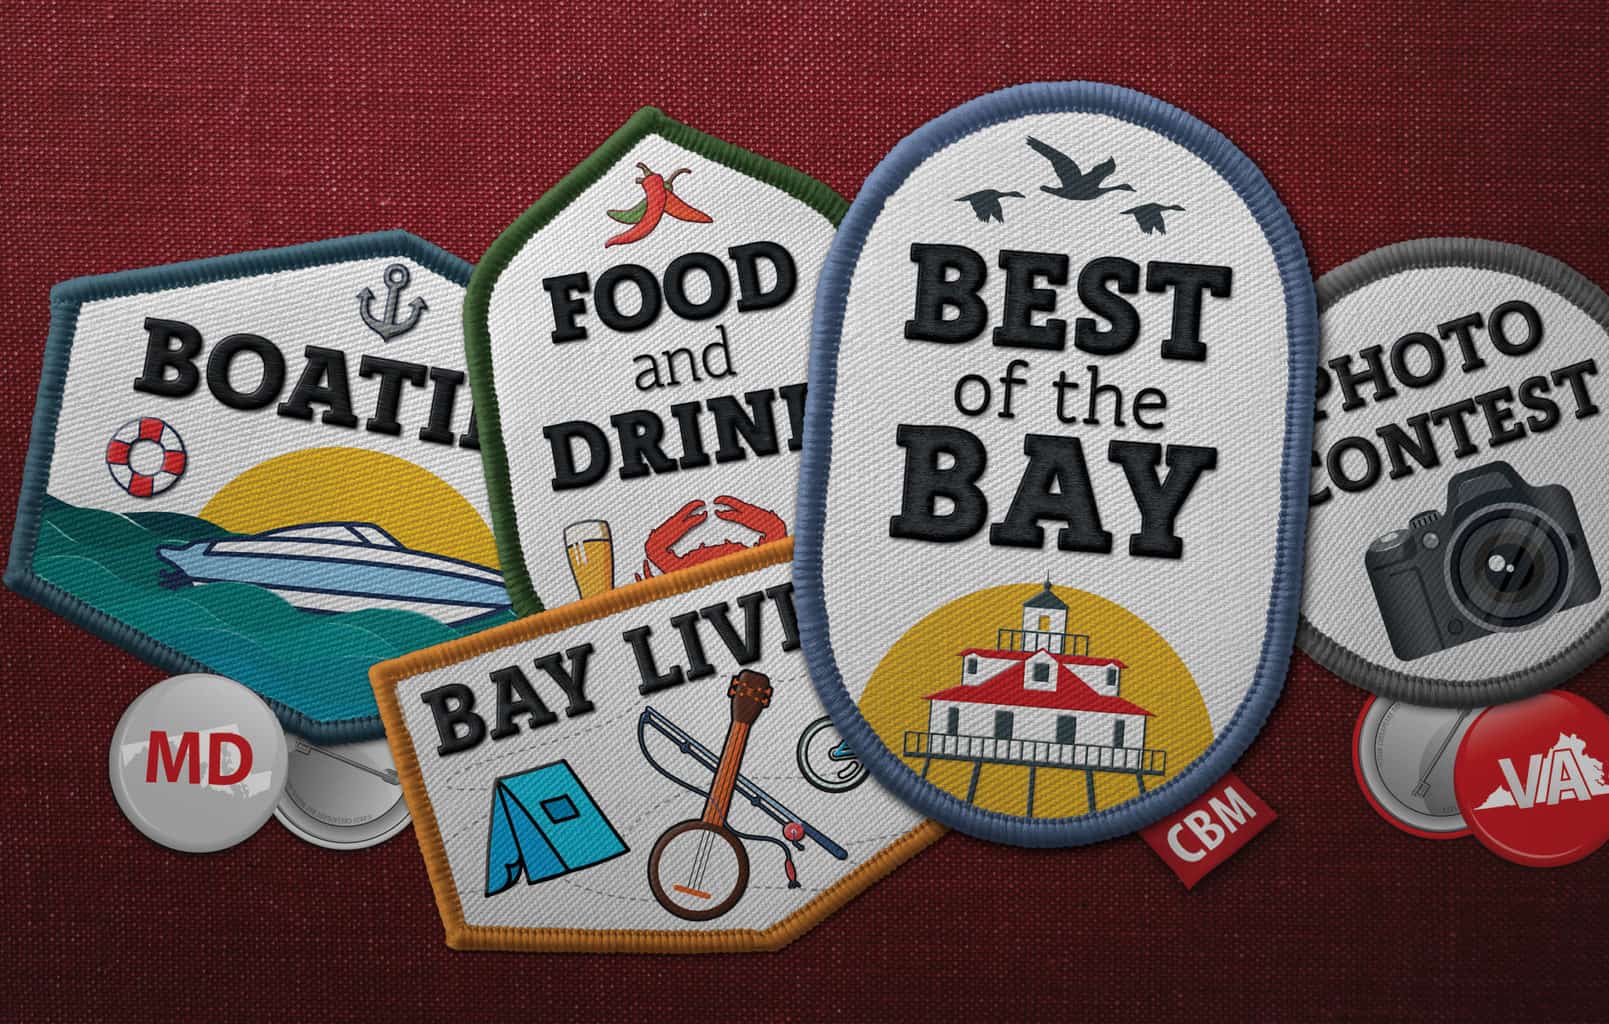 Vote for the Best of the Bay 2022